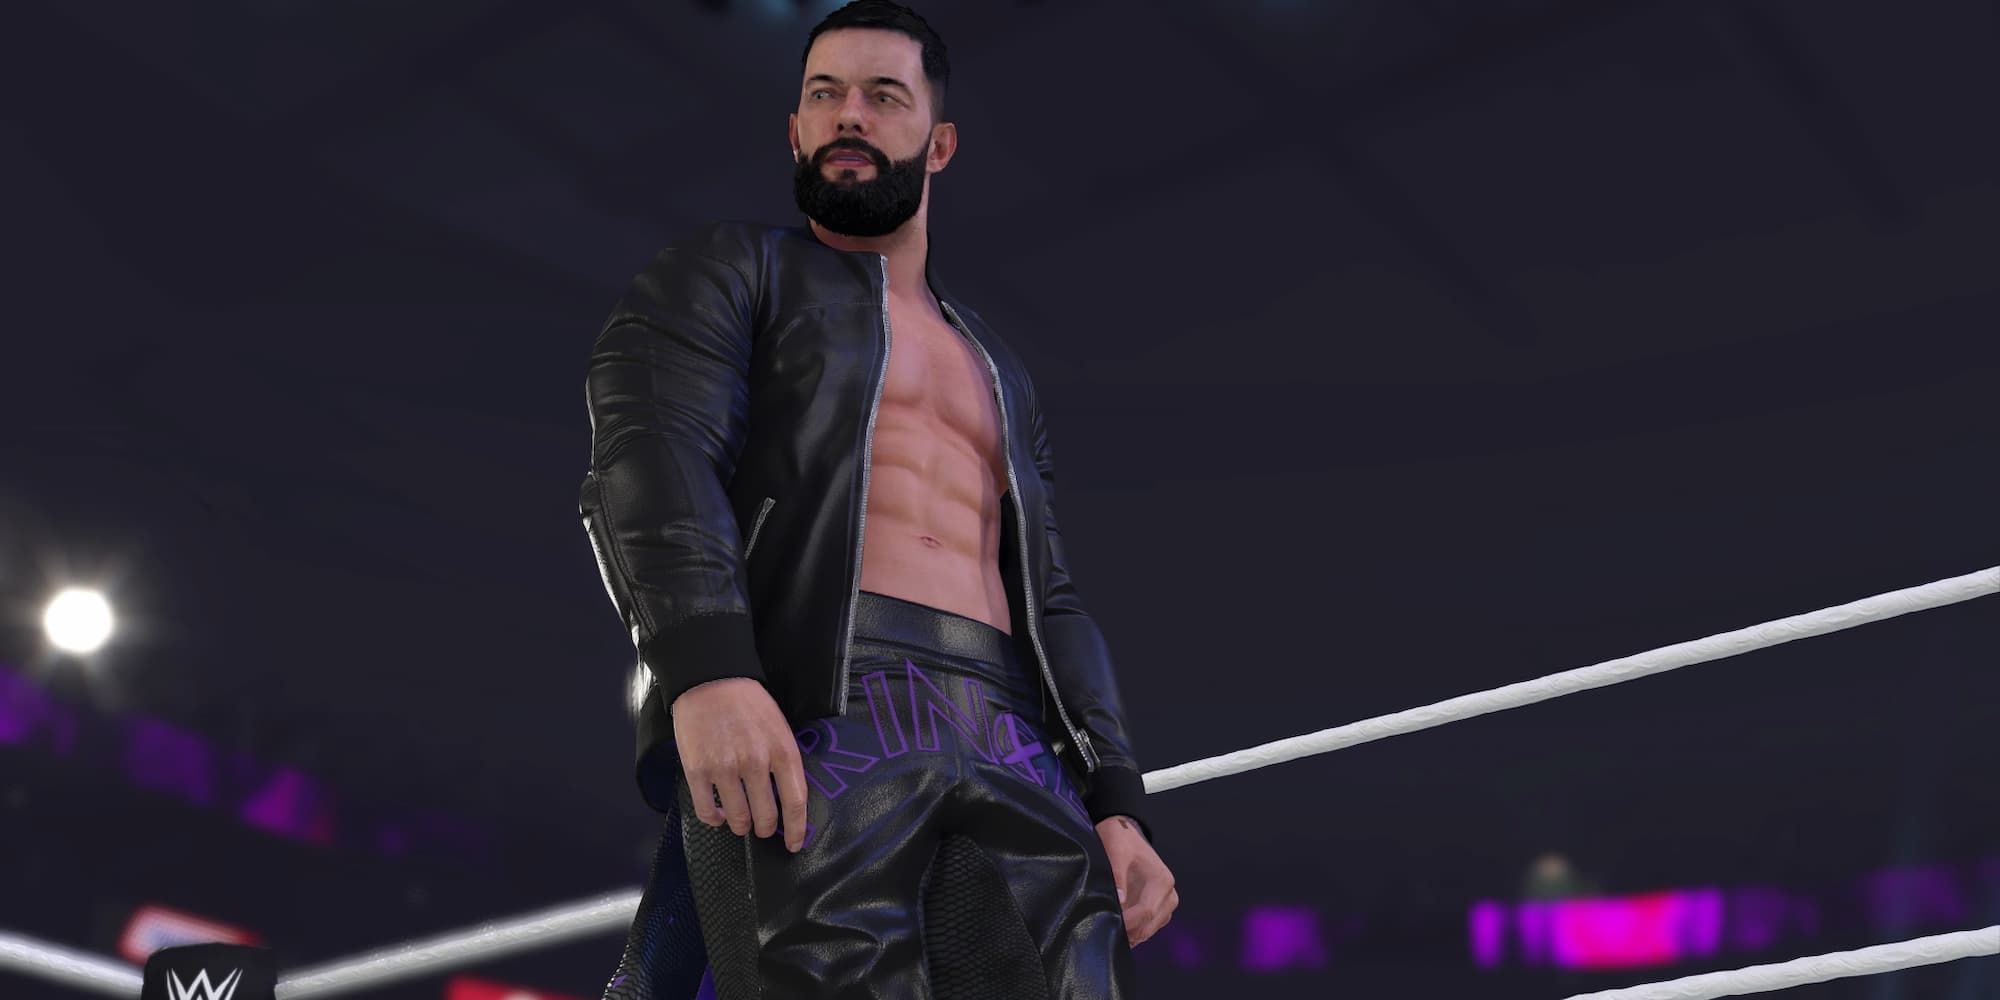 Finn Balor stands in the ring and awaits his opponent in WWE 2K23.